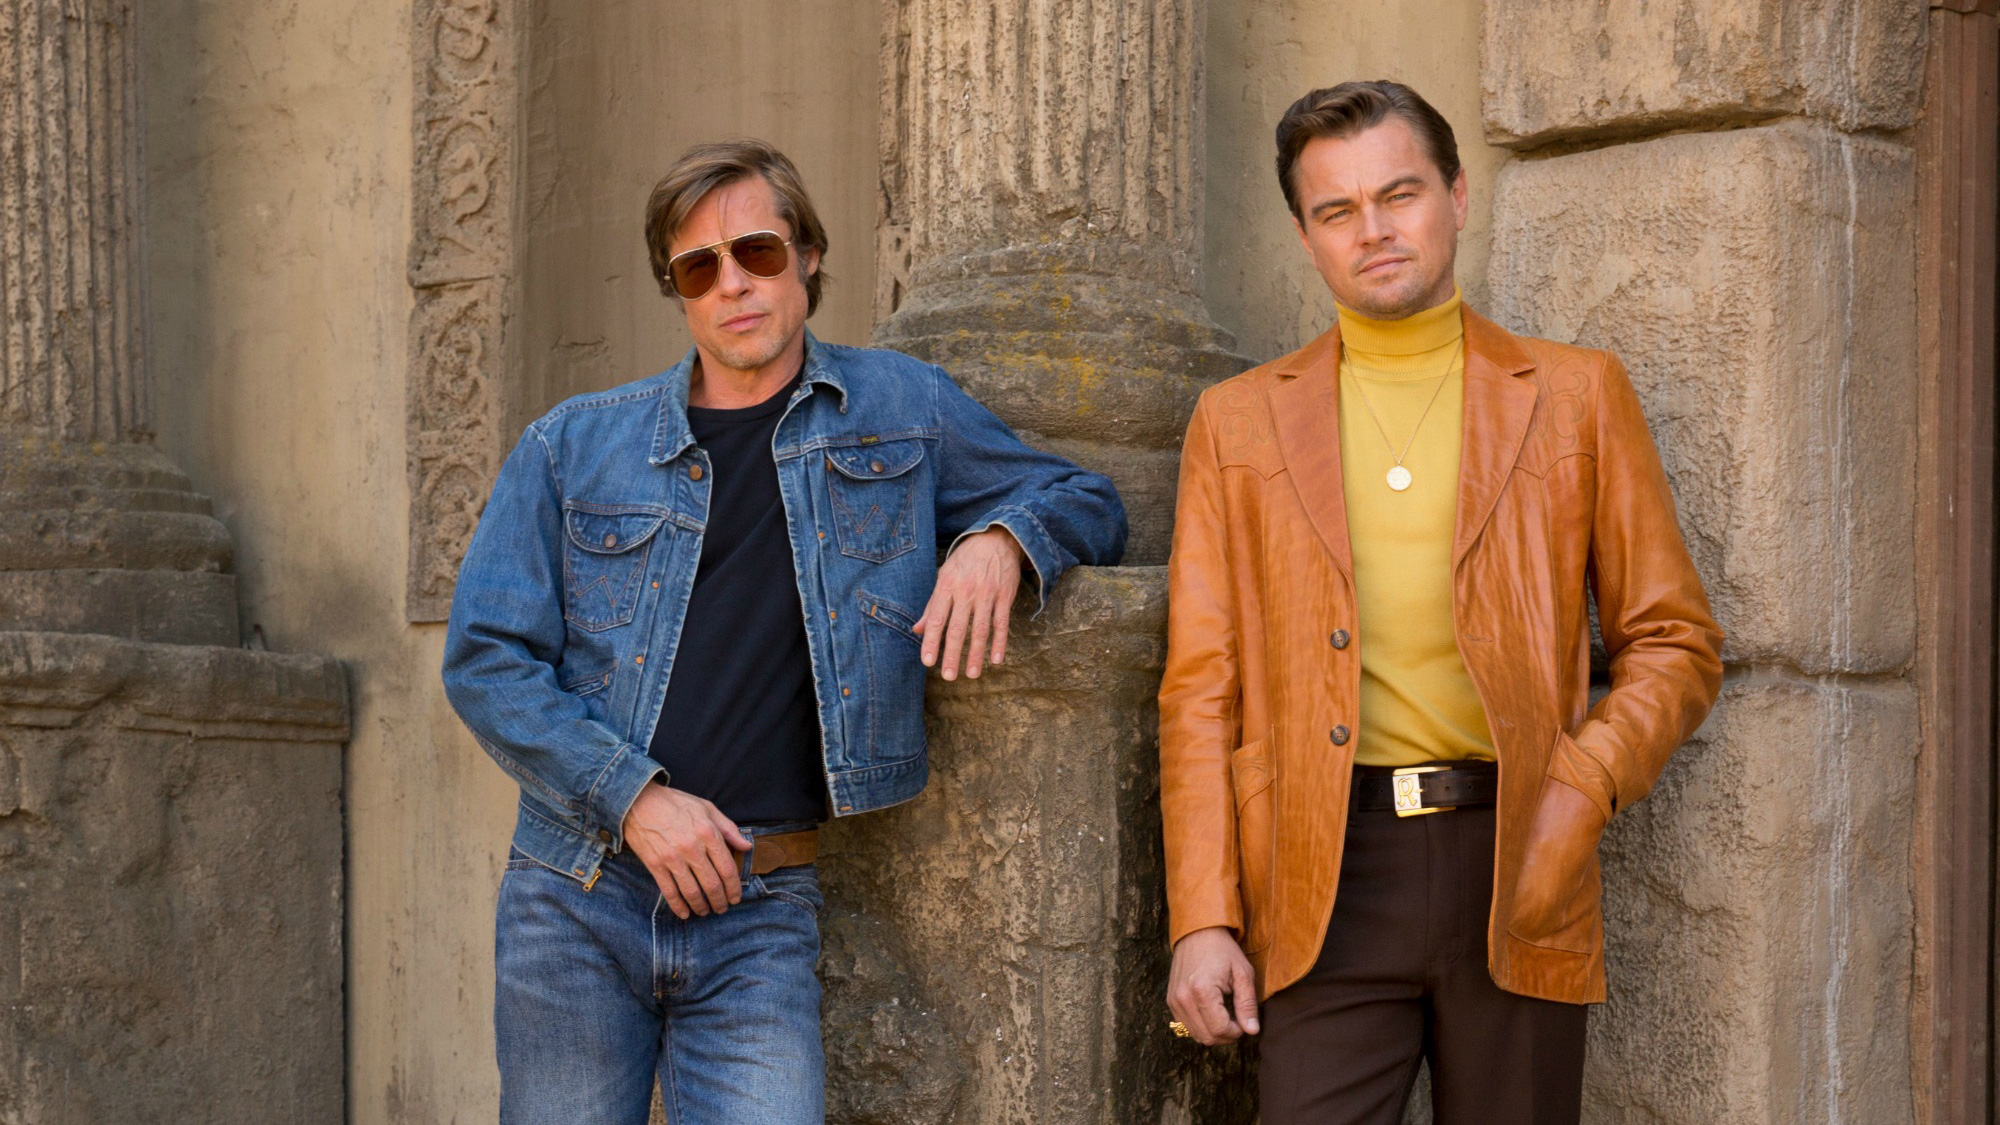 Wallpapers Once Upon a Time in Hollywood actors 2019 Movies on the desktop